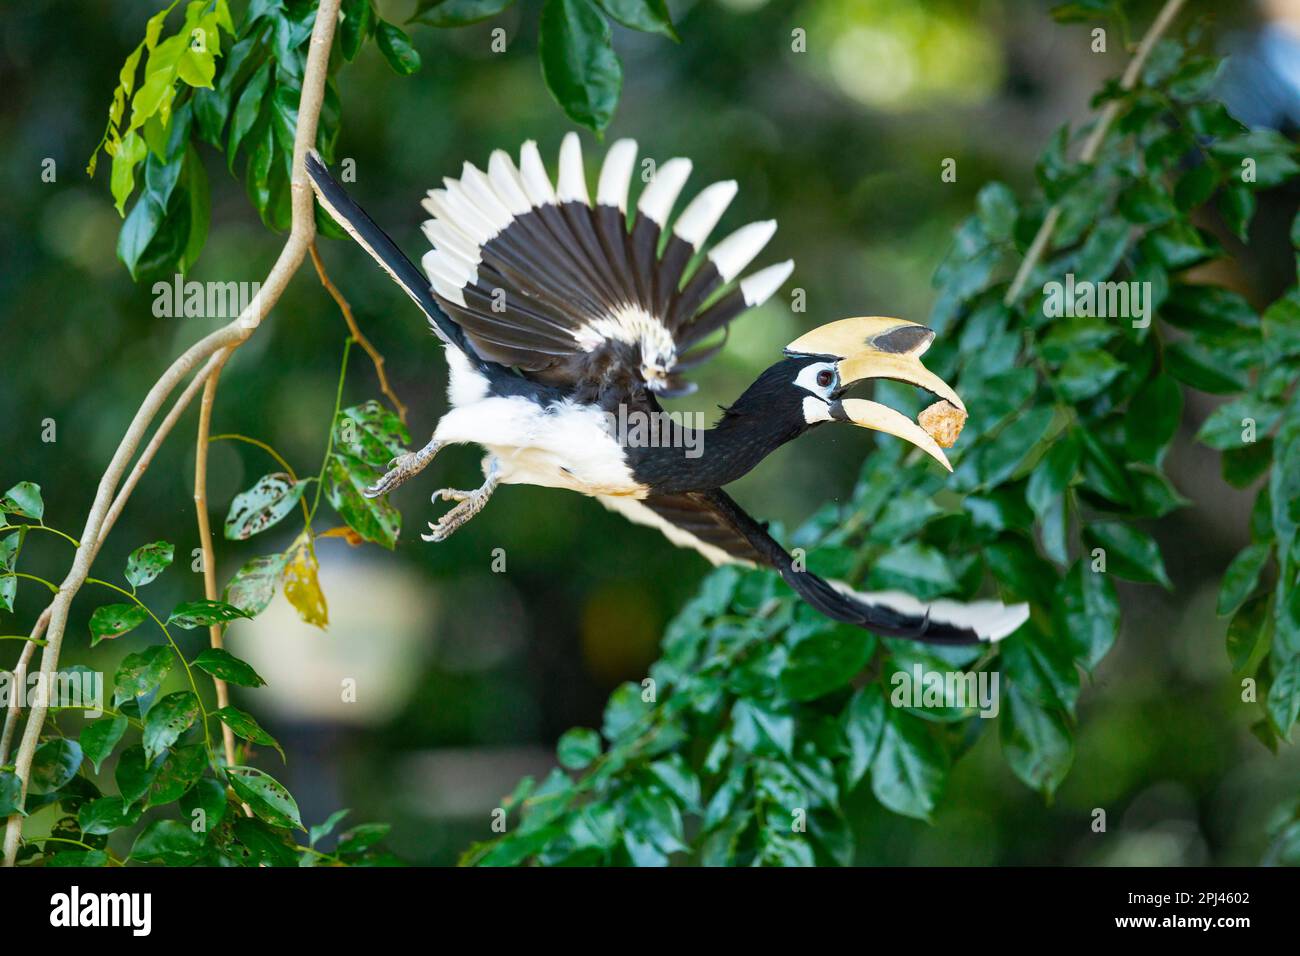 Adult male oriental pied hornbill brings earth (from a nearby construction site) to the female building nest inside hole of Angsana tree, Singapore Stock Photo